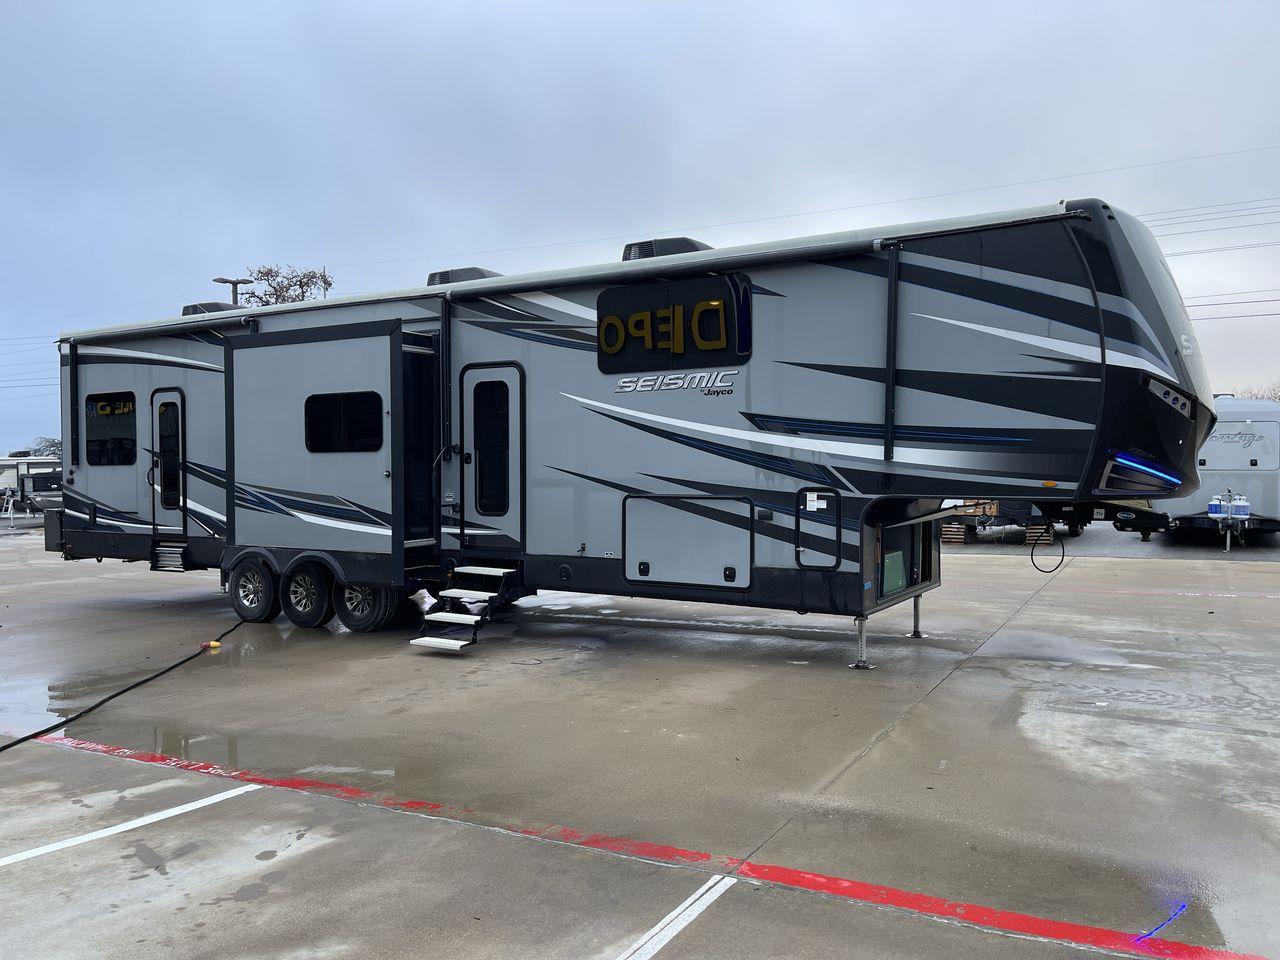 2018 GRAY JAYCO SEISMIC 4250 - (1UJCJSCV5J1) , Length: 44.92 ft. | Dry Weight: 15,570 lbs. | Gross Weight: 20,000 lbs. | Slides: 3 transmission, located at 4319 N Main St, Cleburne, TX, 76033, (817) 678-5133, 32.385960, -97.391212 - Set out to the great outdoors in this 2018 Jayco Seismic 4250 and enjoy all the amenities it has to offer! This toy hauler measures just a bit under 45 ft. in length and 13.32 ft. in height, providing great space and comfort. It has a dry weight of 15,570 lbs. and a GVWR of 20,000 lbs. It also comes - Photo #27